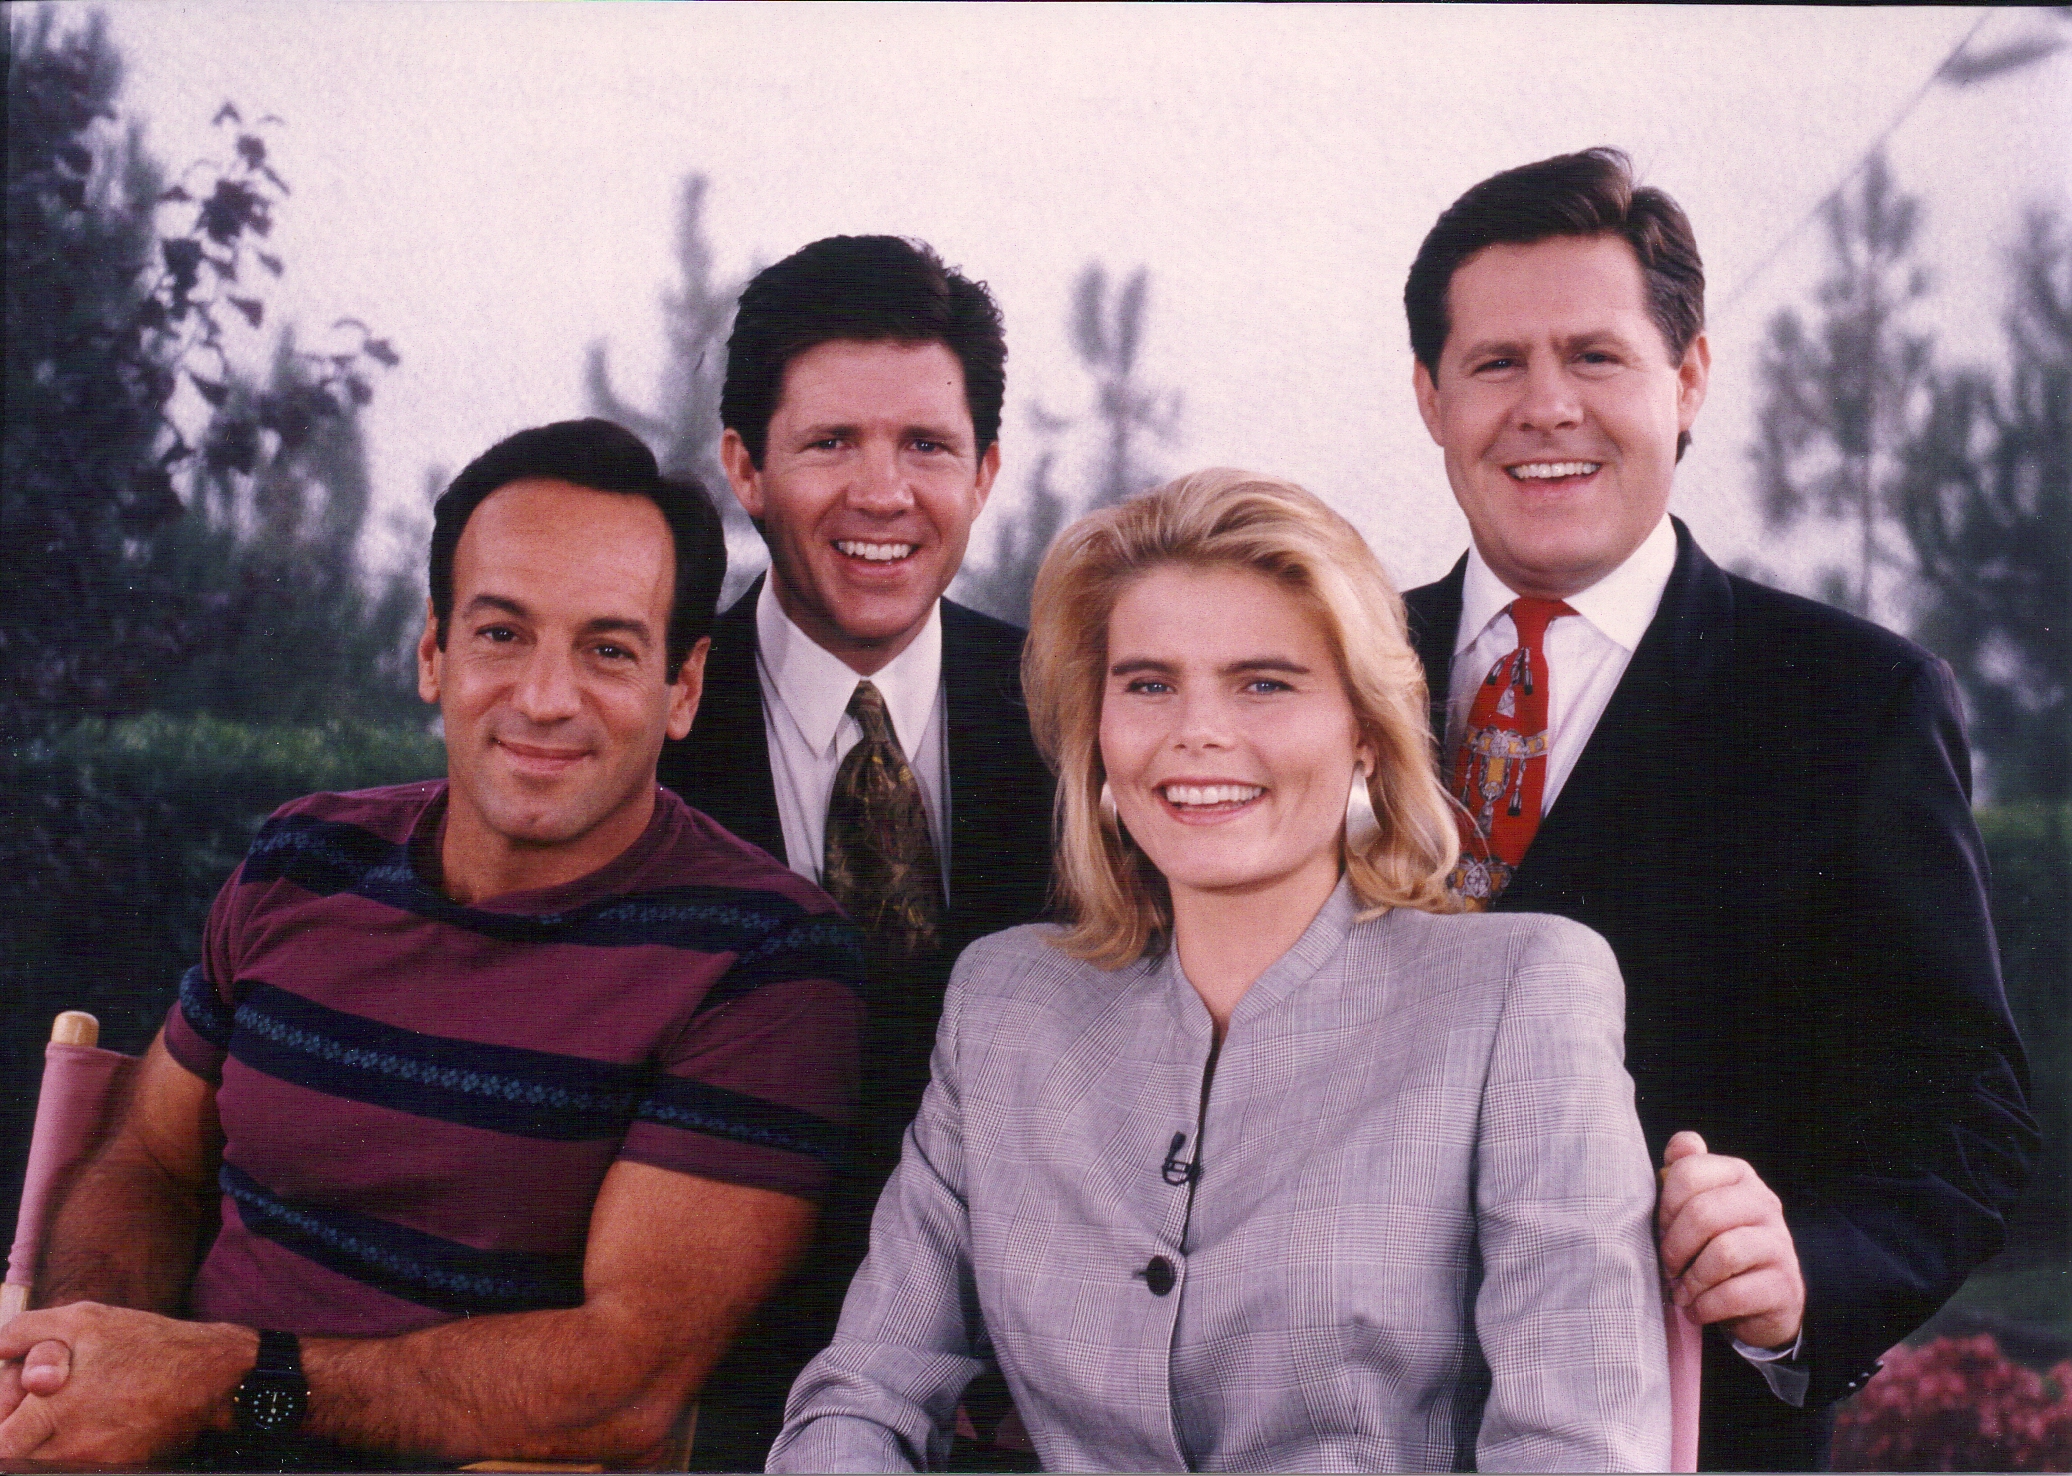 Peter Onorati and Mariel Hemingway join the McCain Brothers for pic after Good Morning Oklahoma interview.